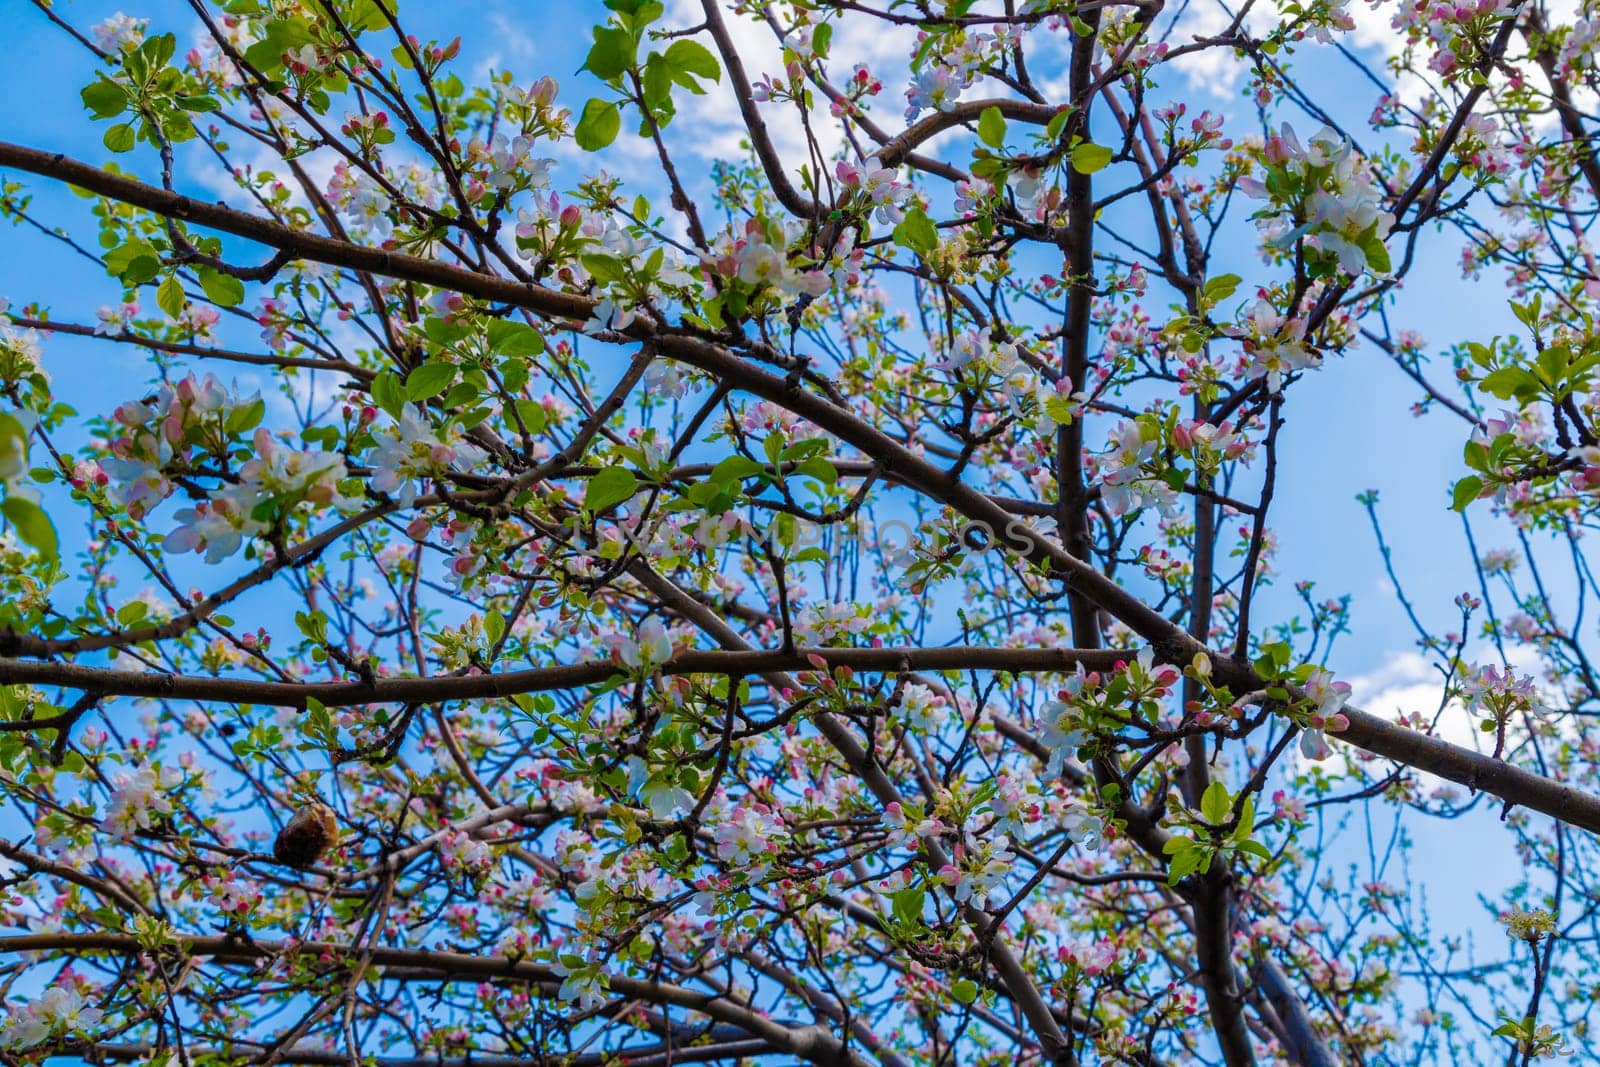 blooming apple tree, closeup wide angle full-frame view from below at sunny spring day